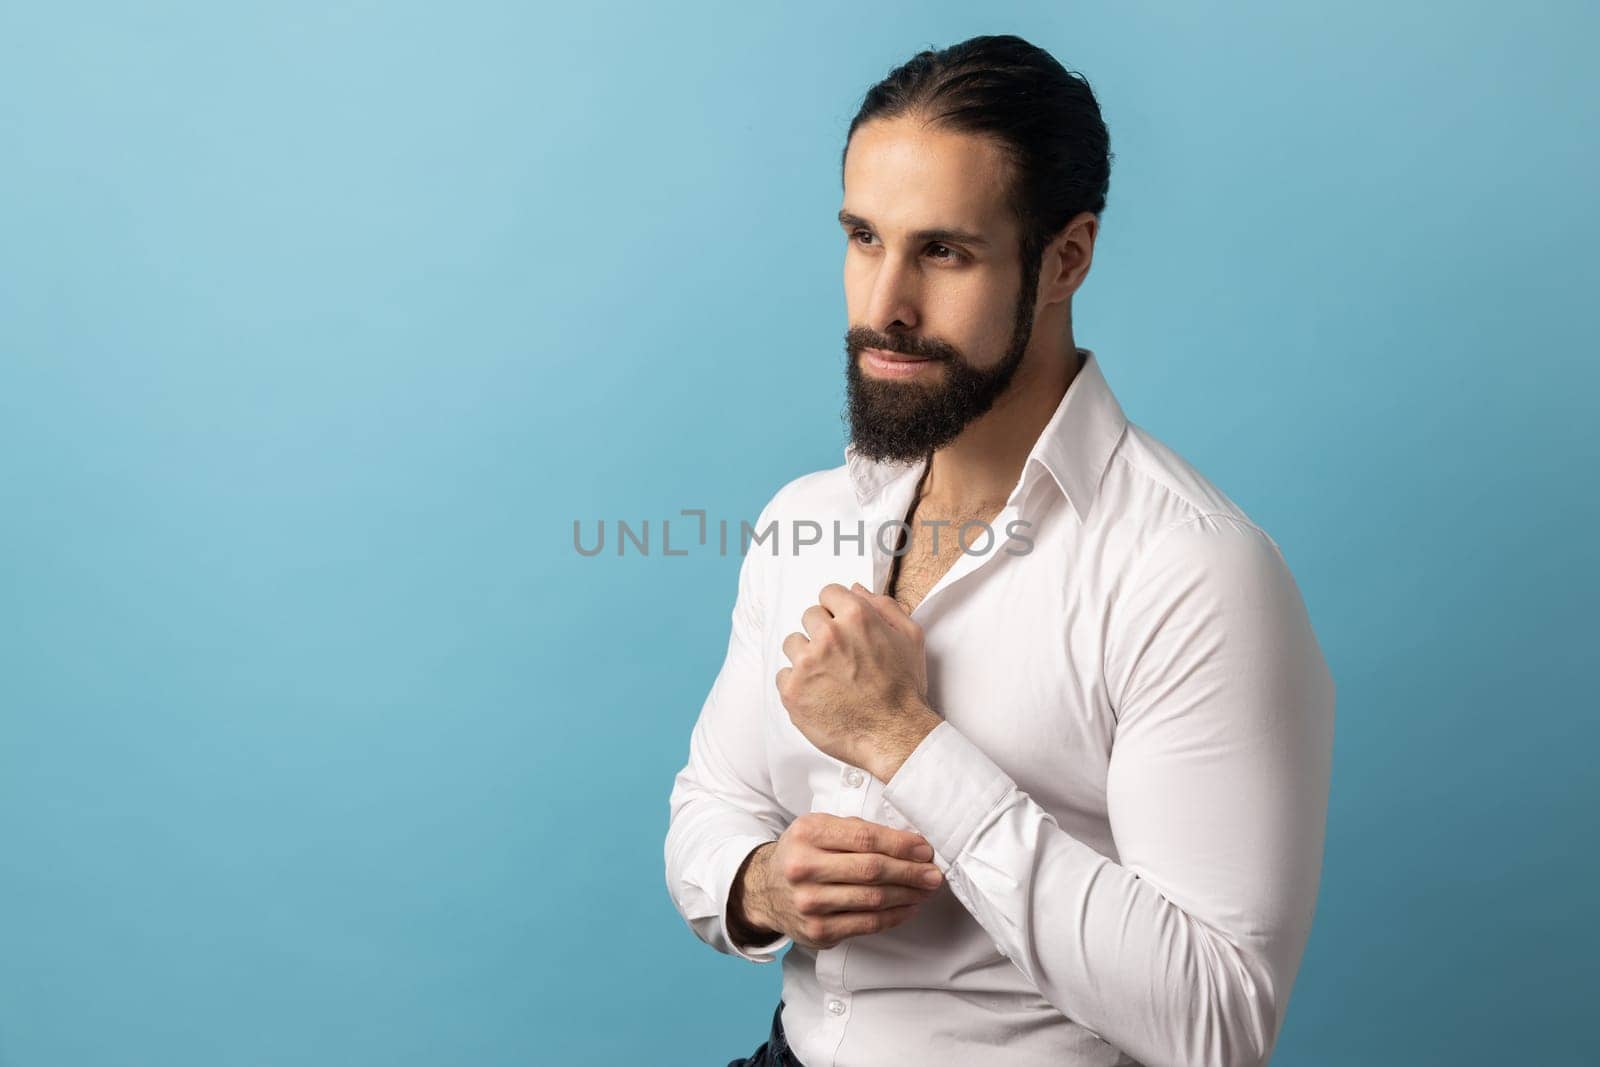 Portrait of handsome confident pensive man with beard wearing white shirt looking away and tucks cufflinks, going to an important event. Indoor studio shot isolated on blue background.